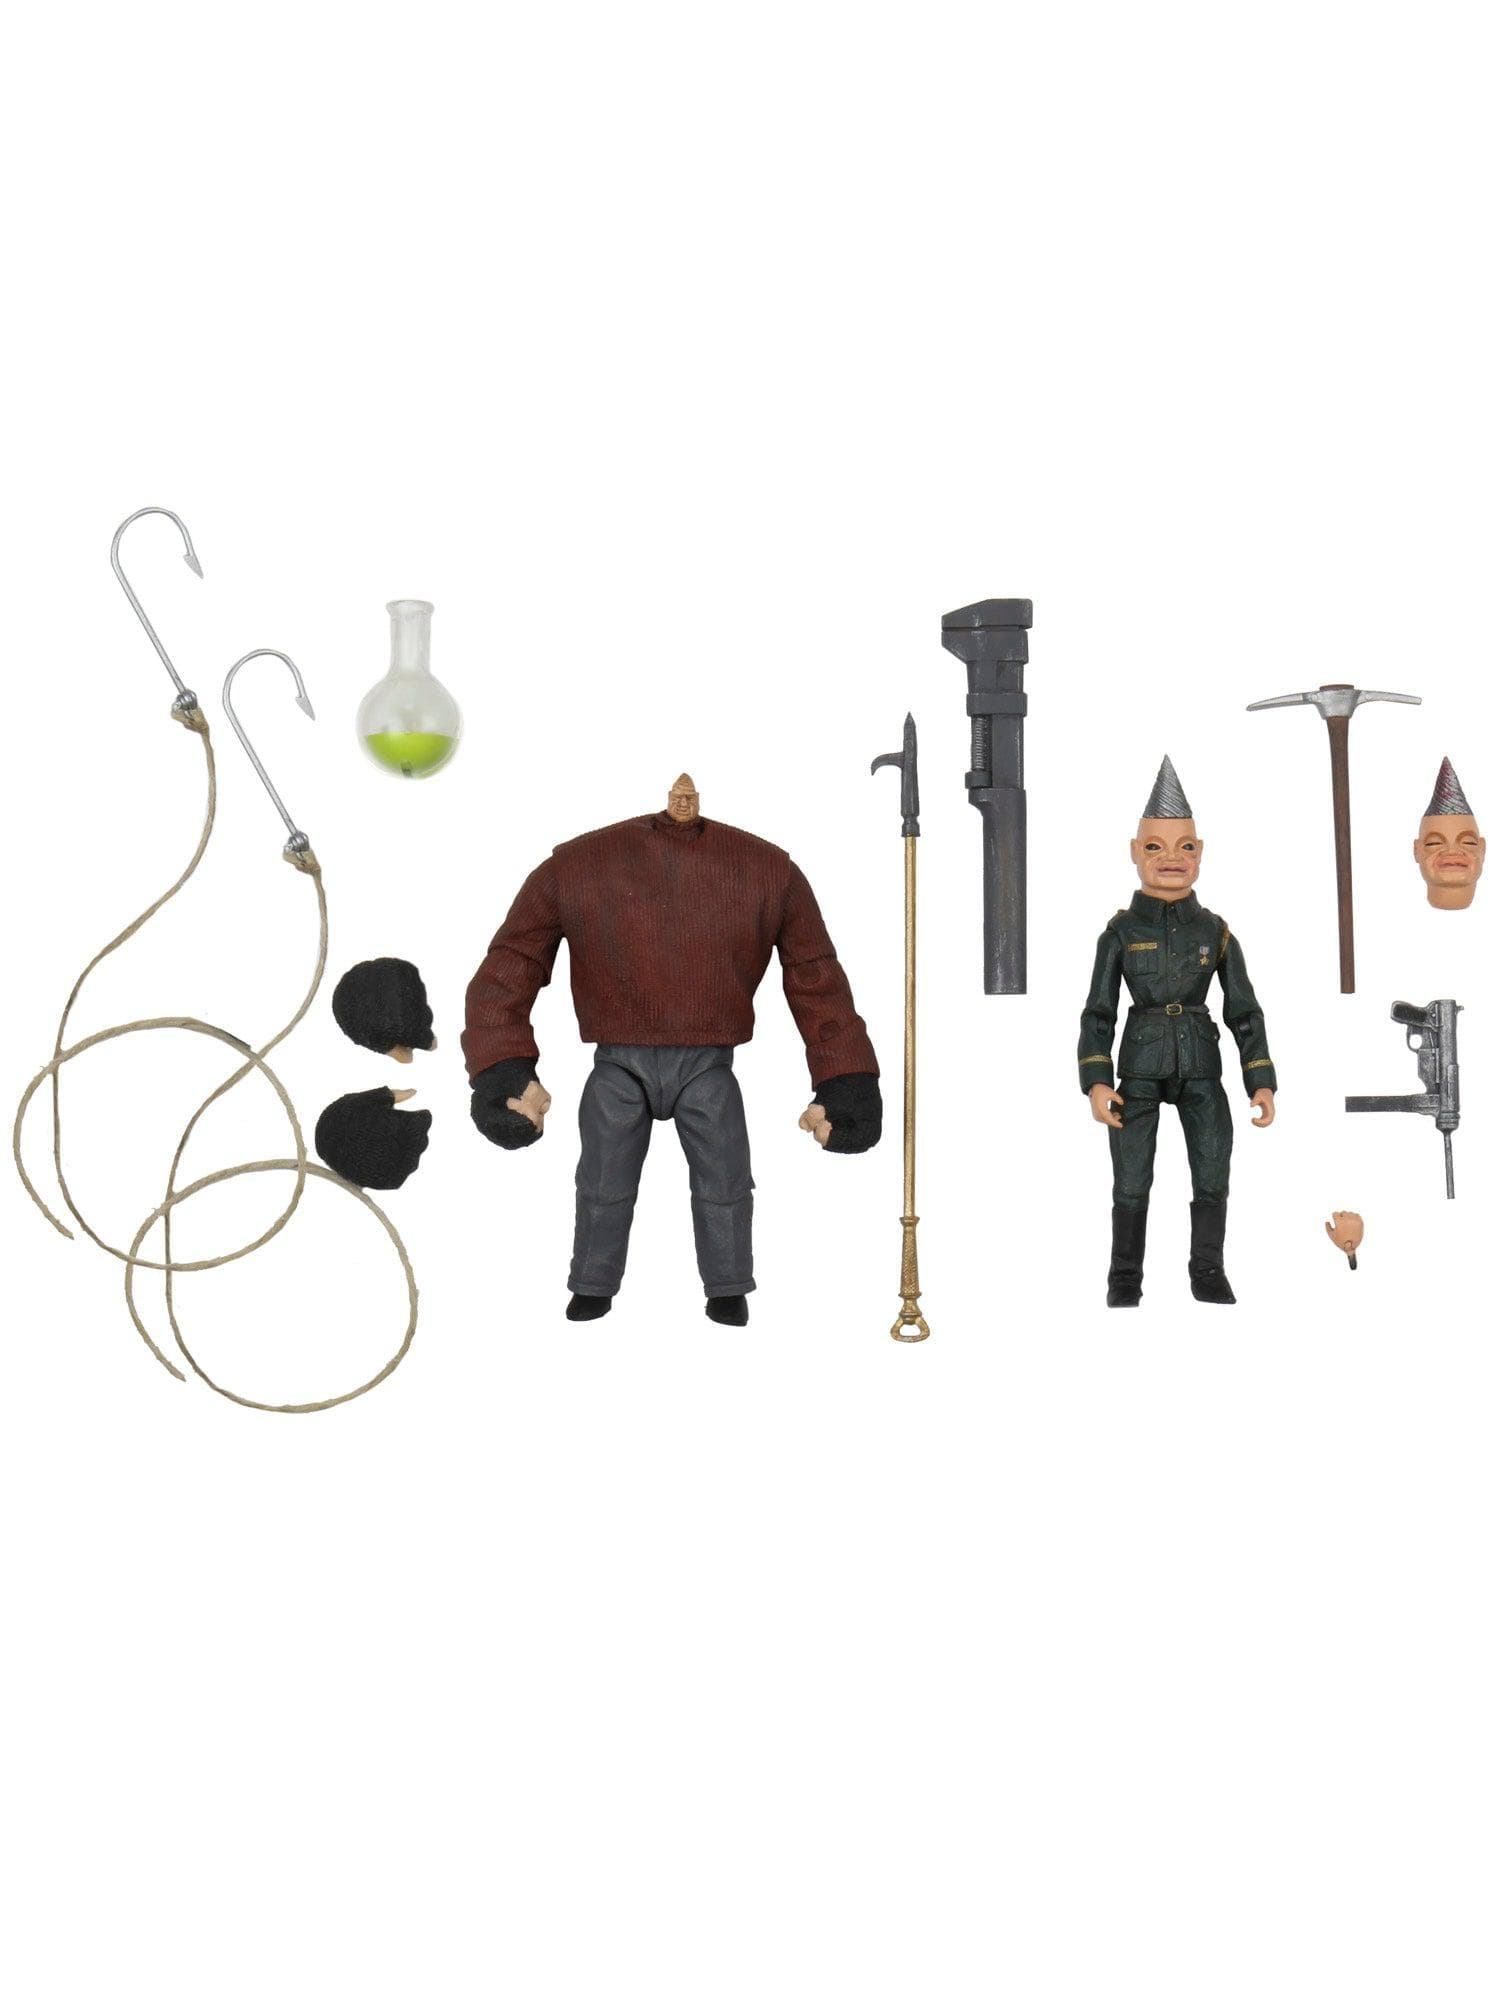 NECA - Puppet Master - 7" Scale Action Figure - Pinhead and Tunneler 2 Pack - costumes.com